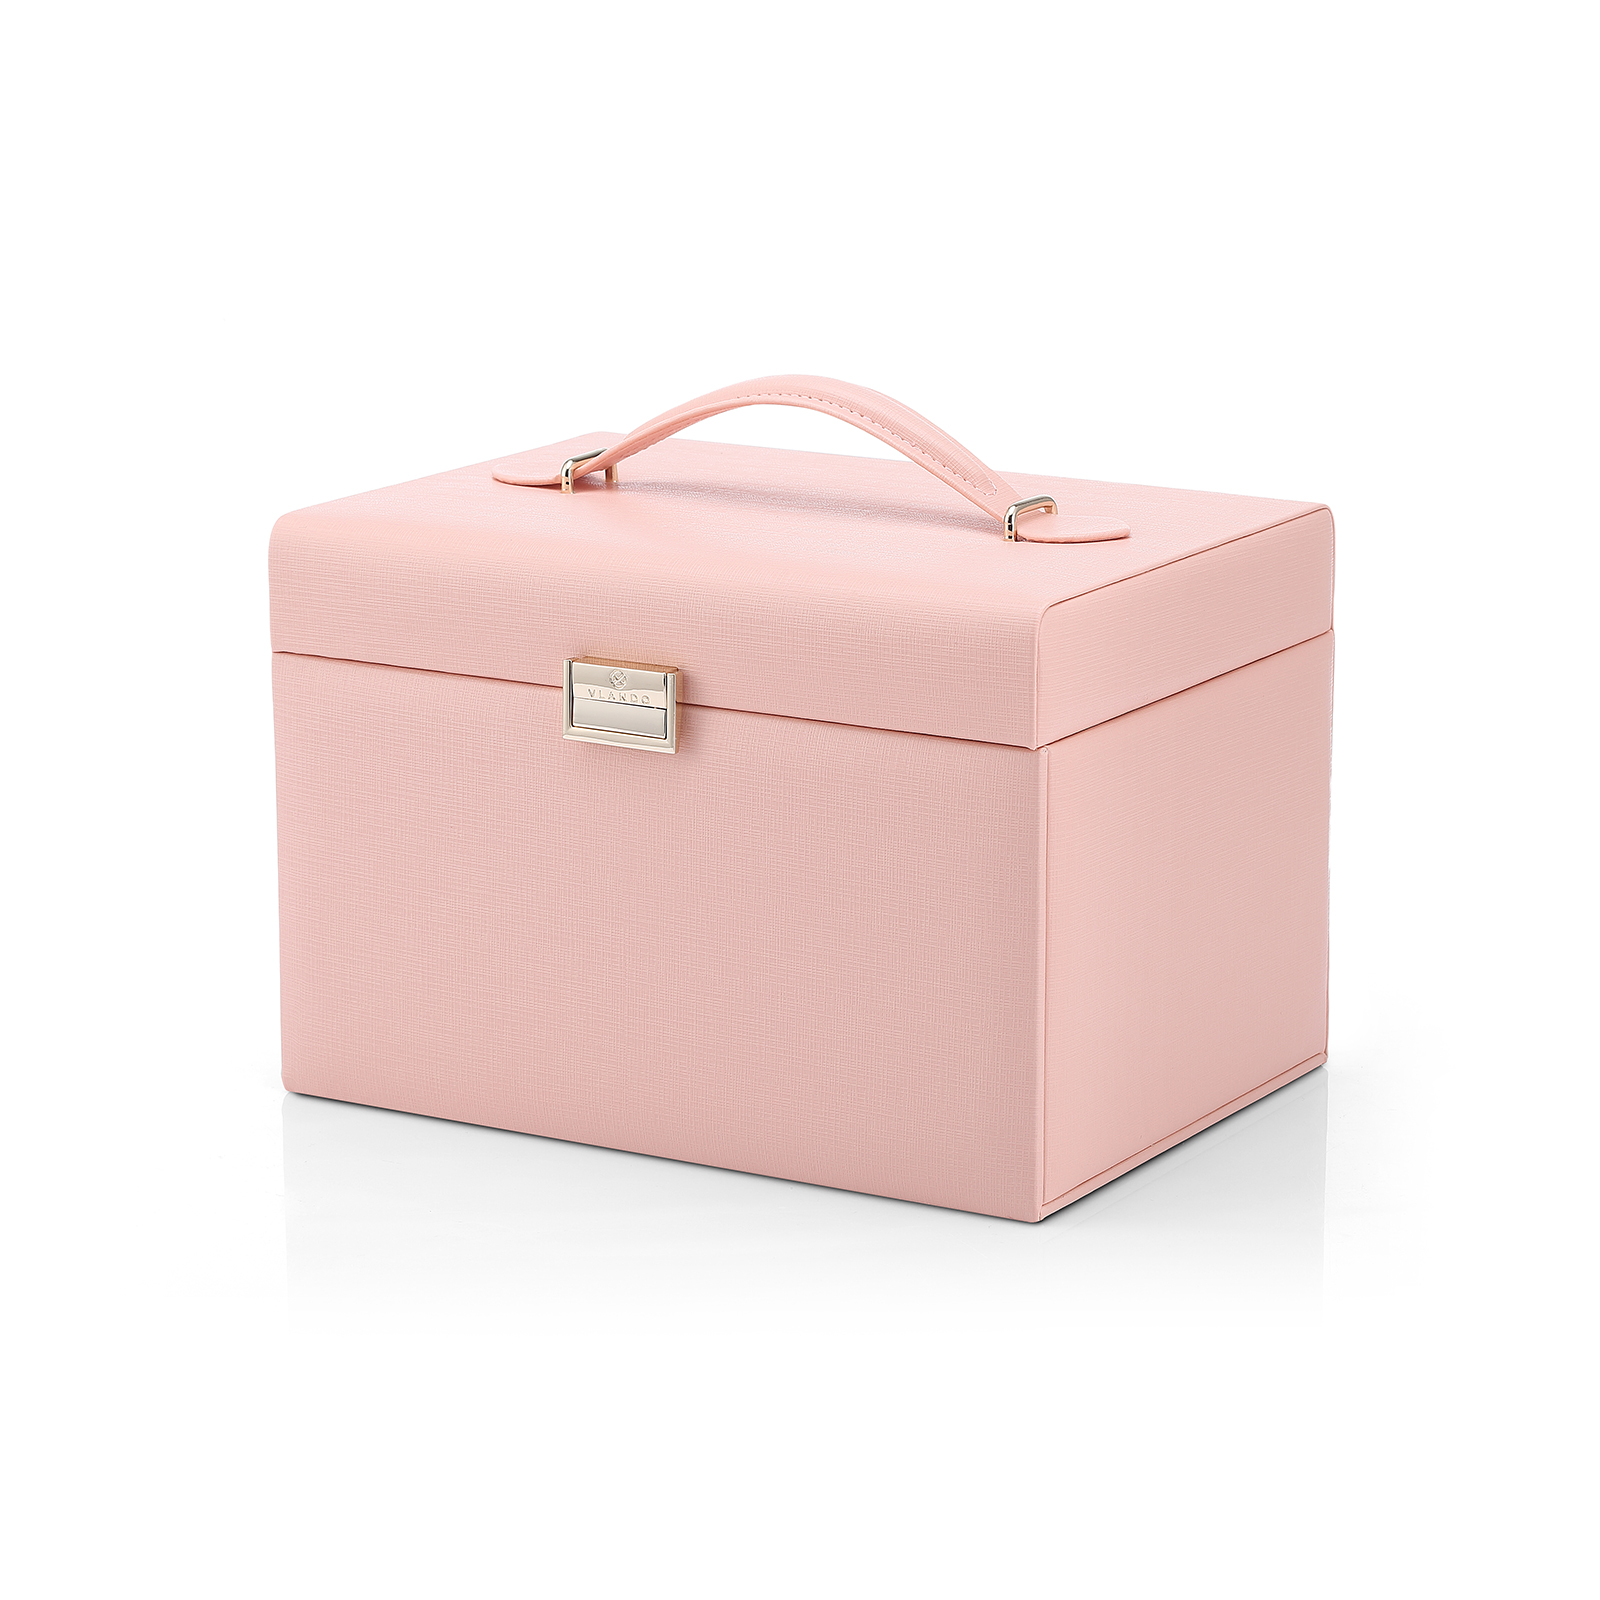 Vlando Jewelry Box Pu Leather Jewelry Storage Boxes with Earrings Necklaces Bracelets Ring Storage Box for Friends Women Girls. 